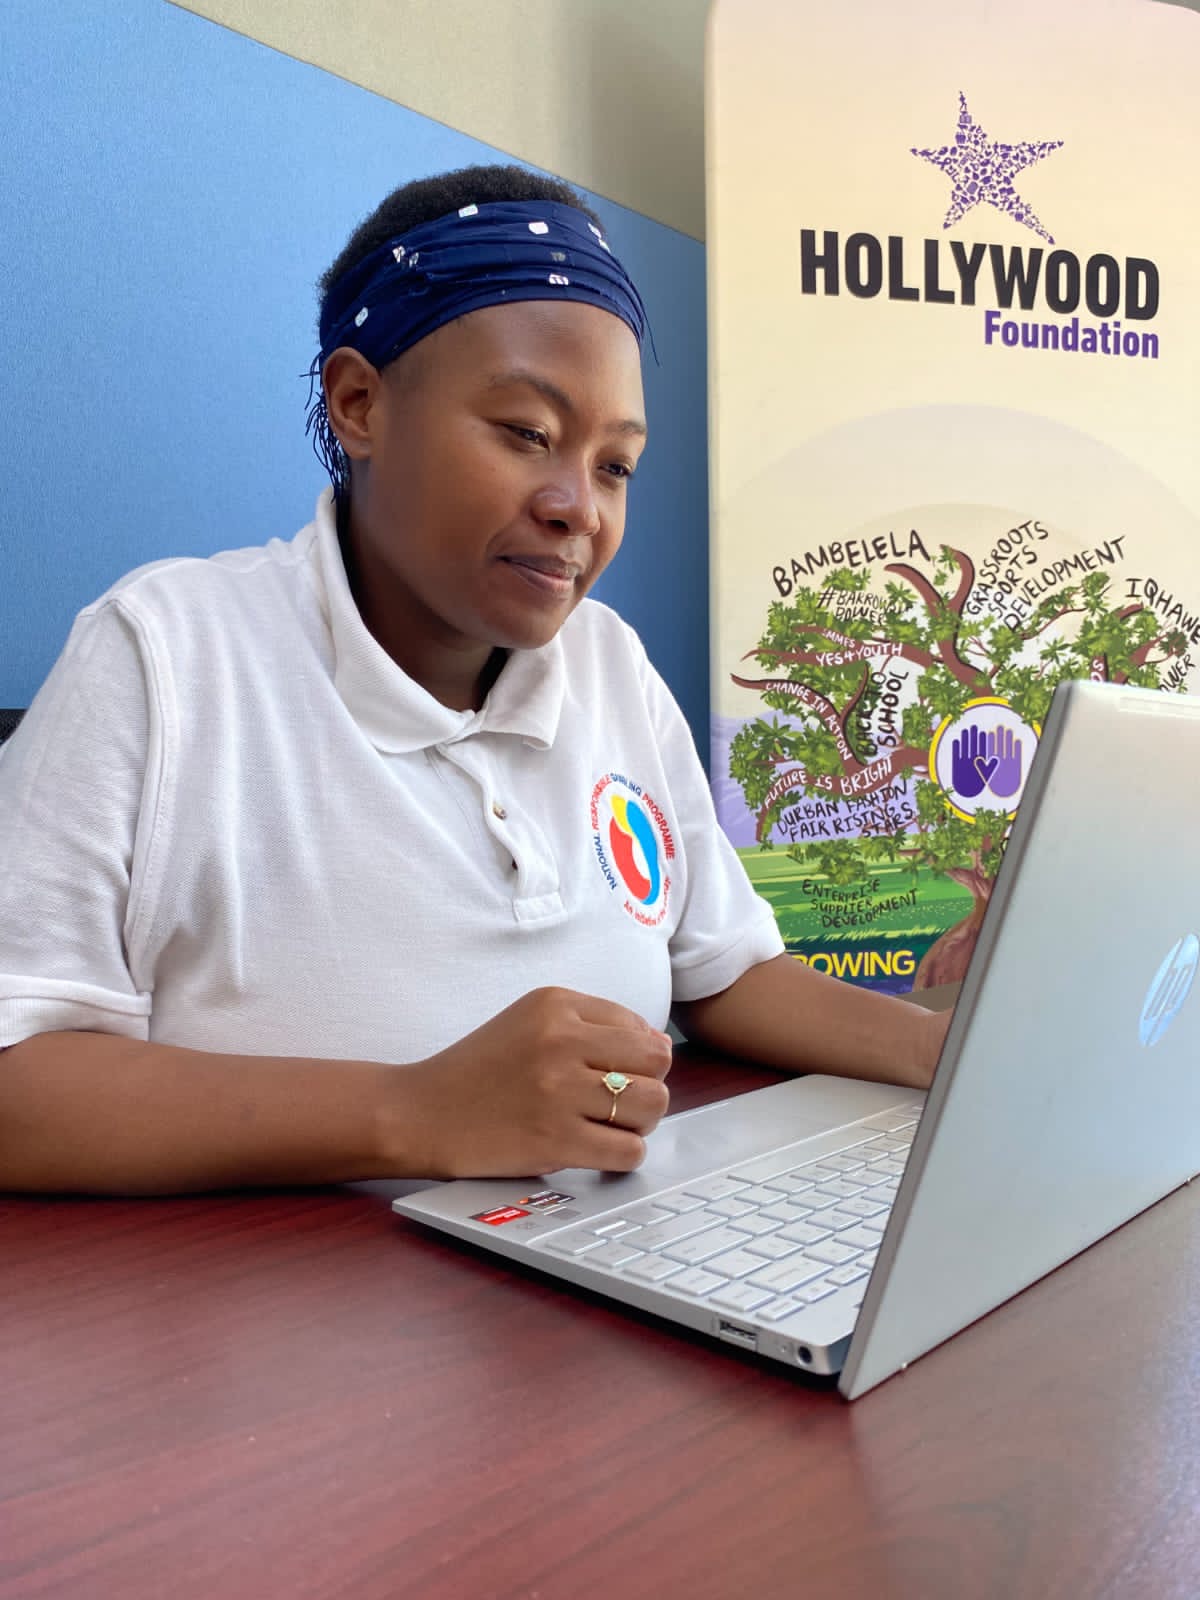 hollywoodfoundation-fa45ec79 d425 40c4 8082 7afe73d83998 002The Hollywood Foundation strengthens its partnership with South African Responsible Gambling FoundationPartnerships